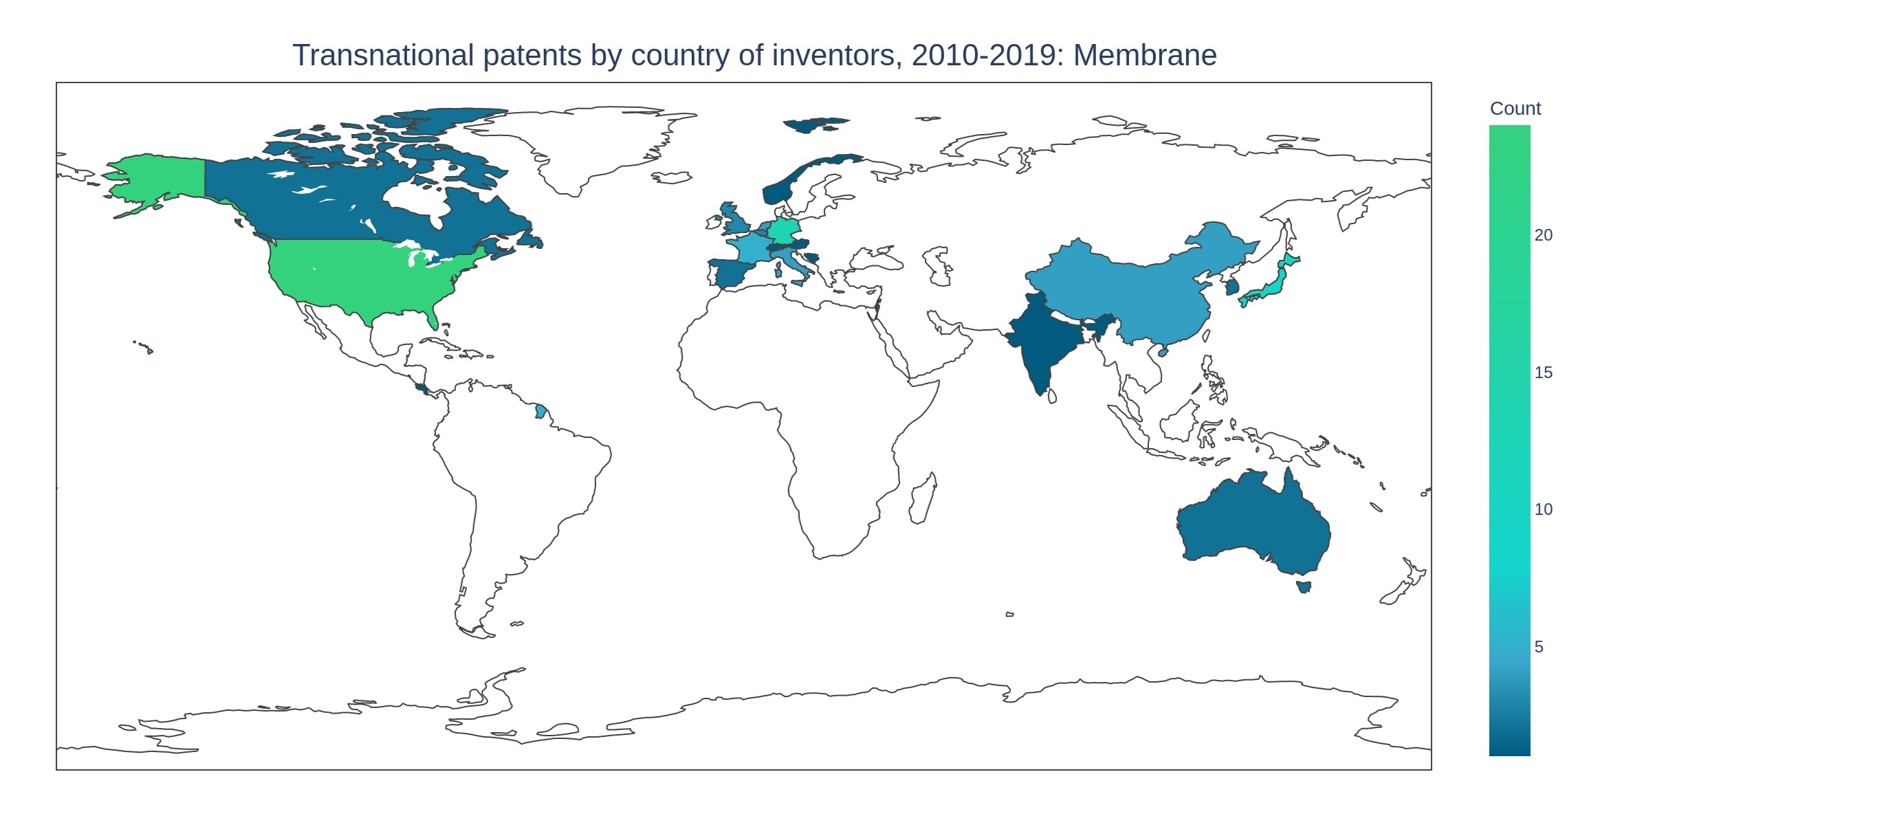 Figure 4: Distribution of transnational patents over countries for membrane-based electrolysis (2010-2019).